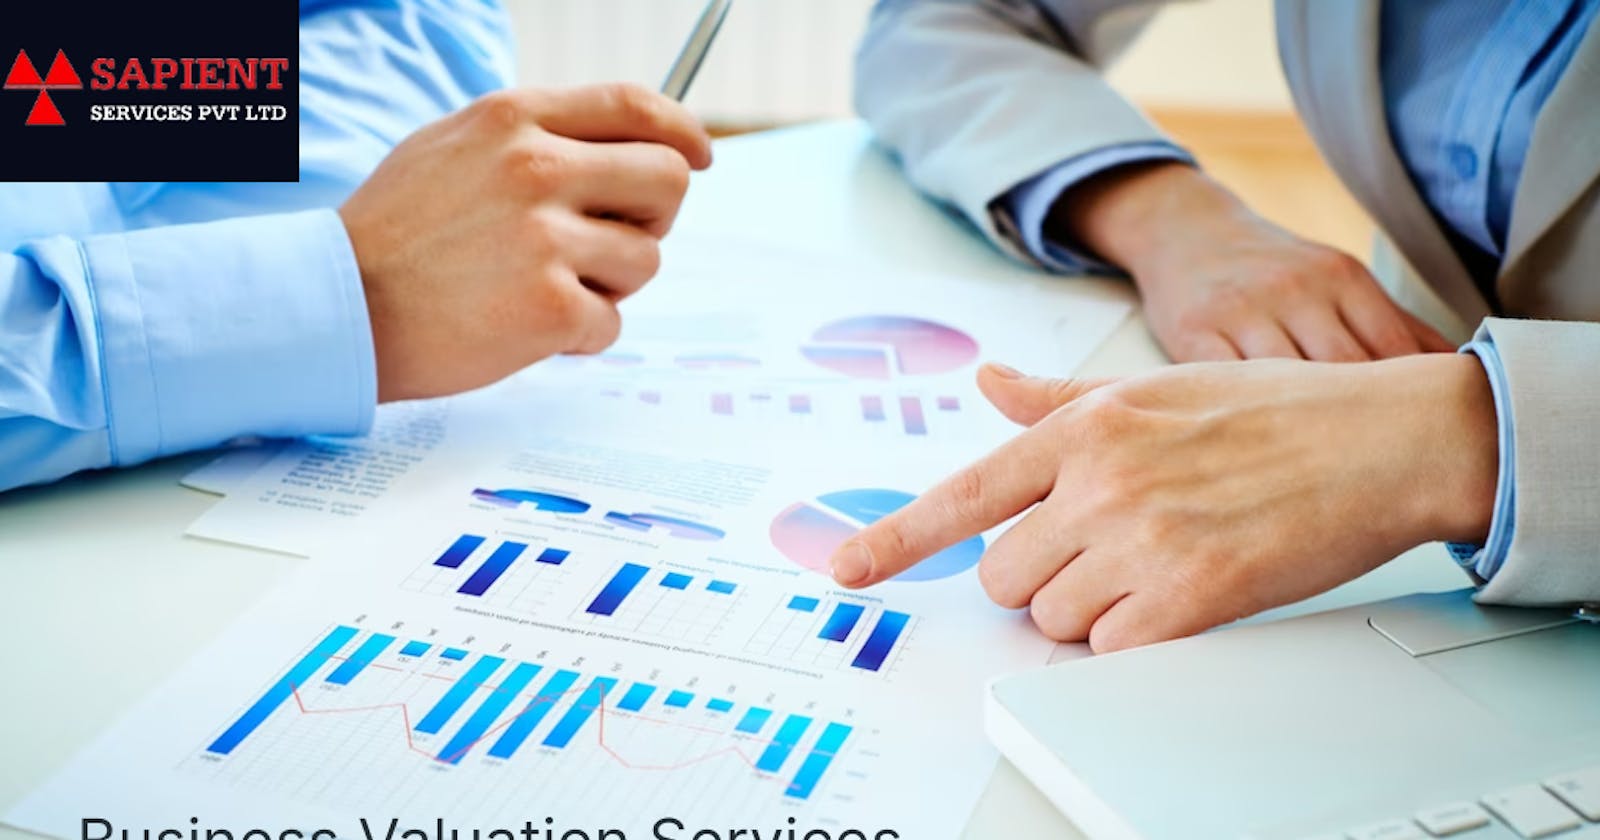 Business Valuation Services - A Basic Need